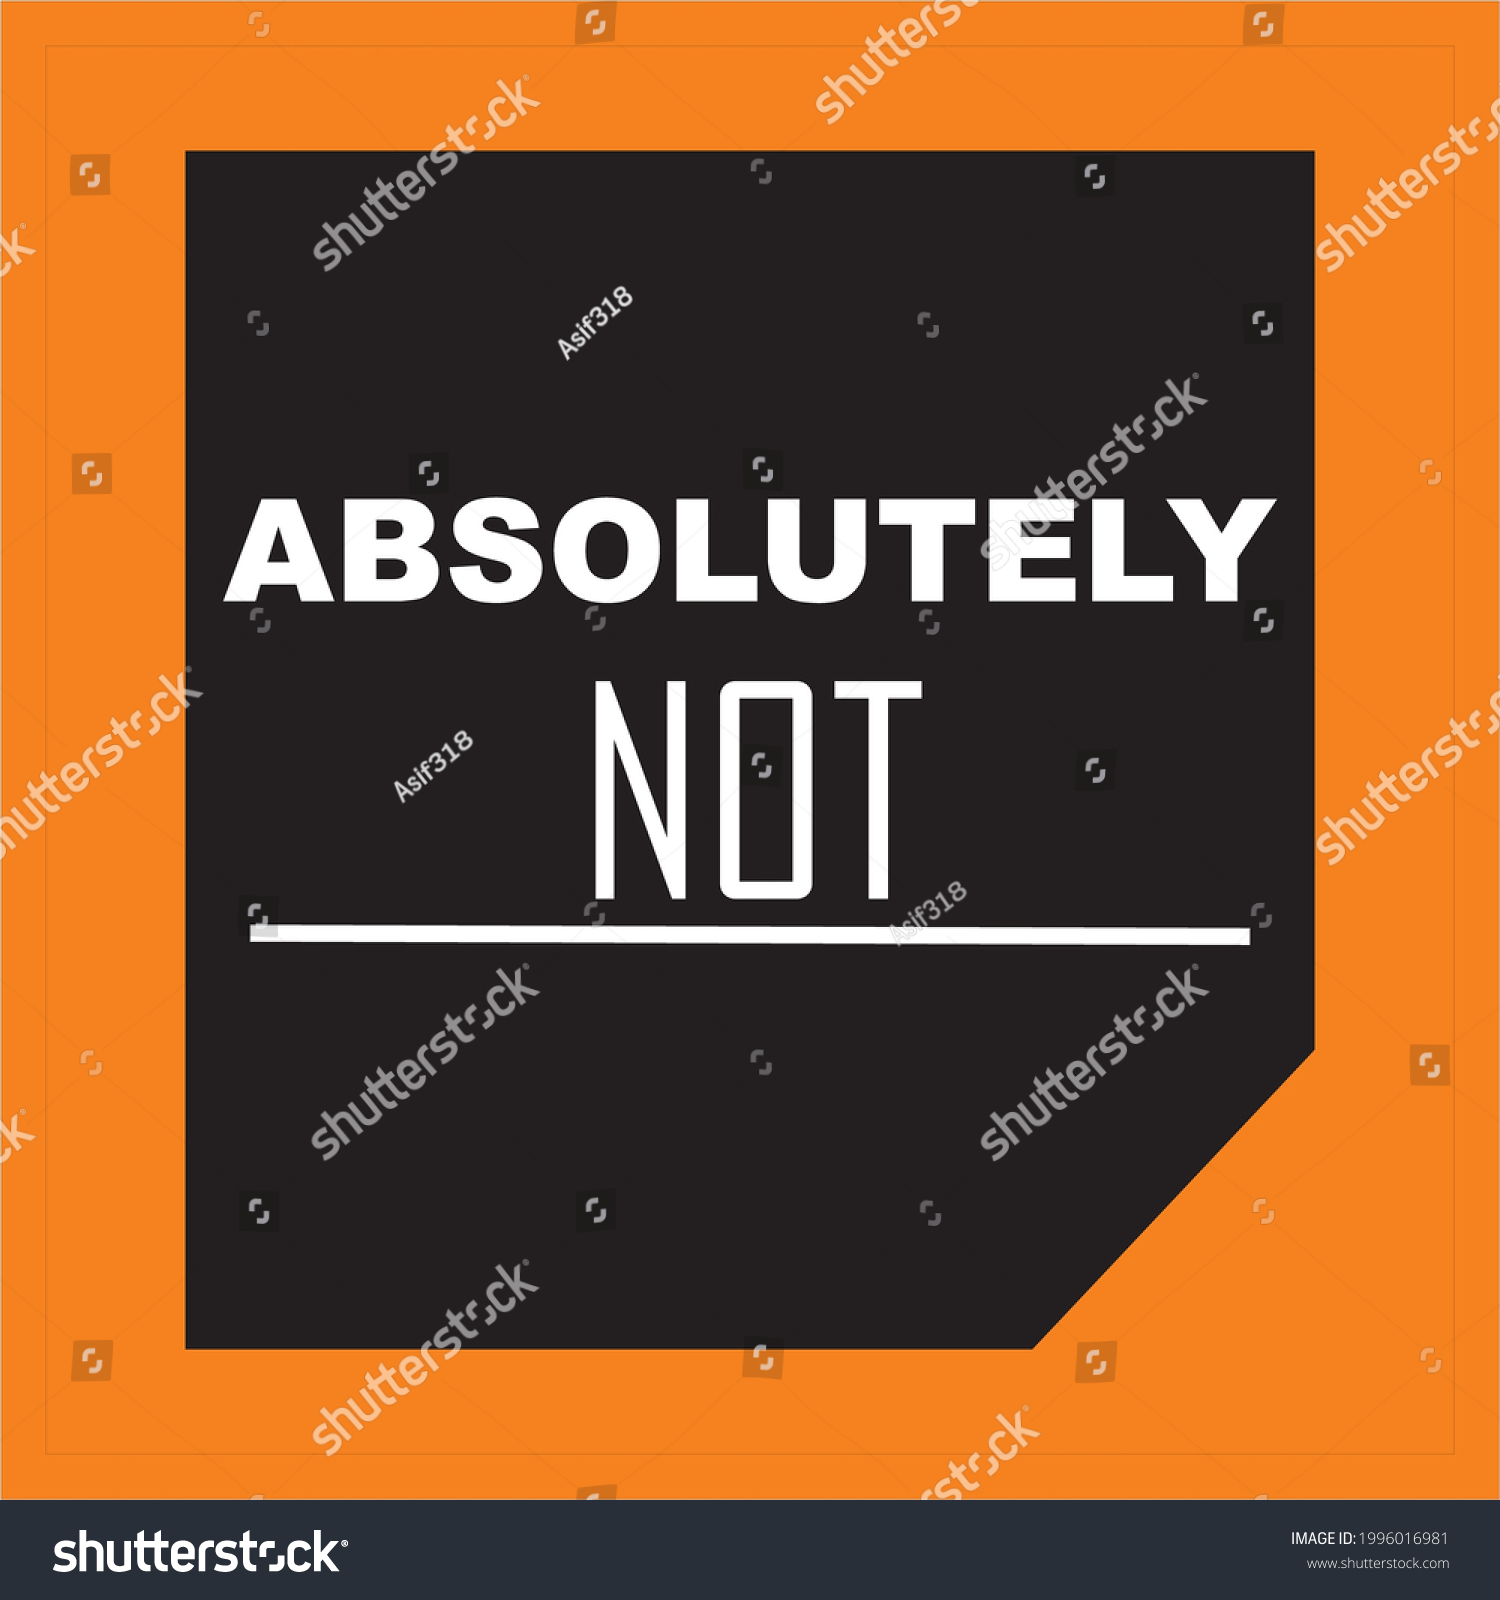 SVG of ABSOLUTELY NOT , TEXT WRITTEN, VECTOR FILE. svg